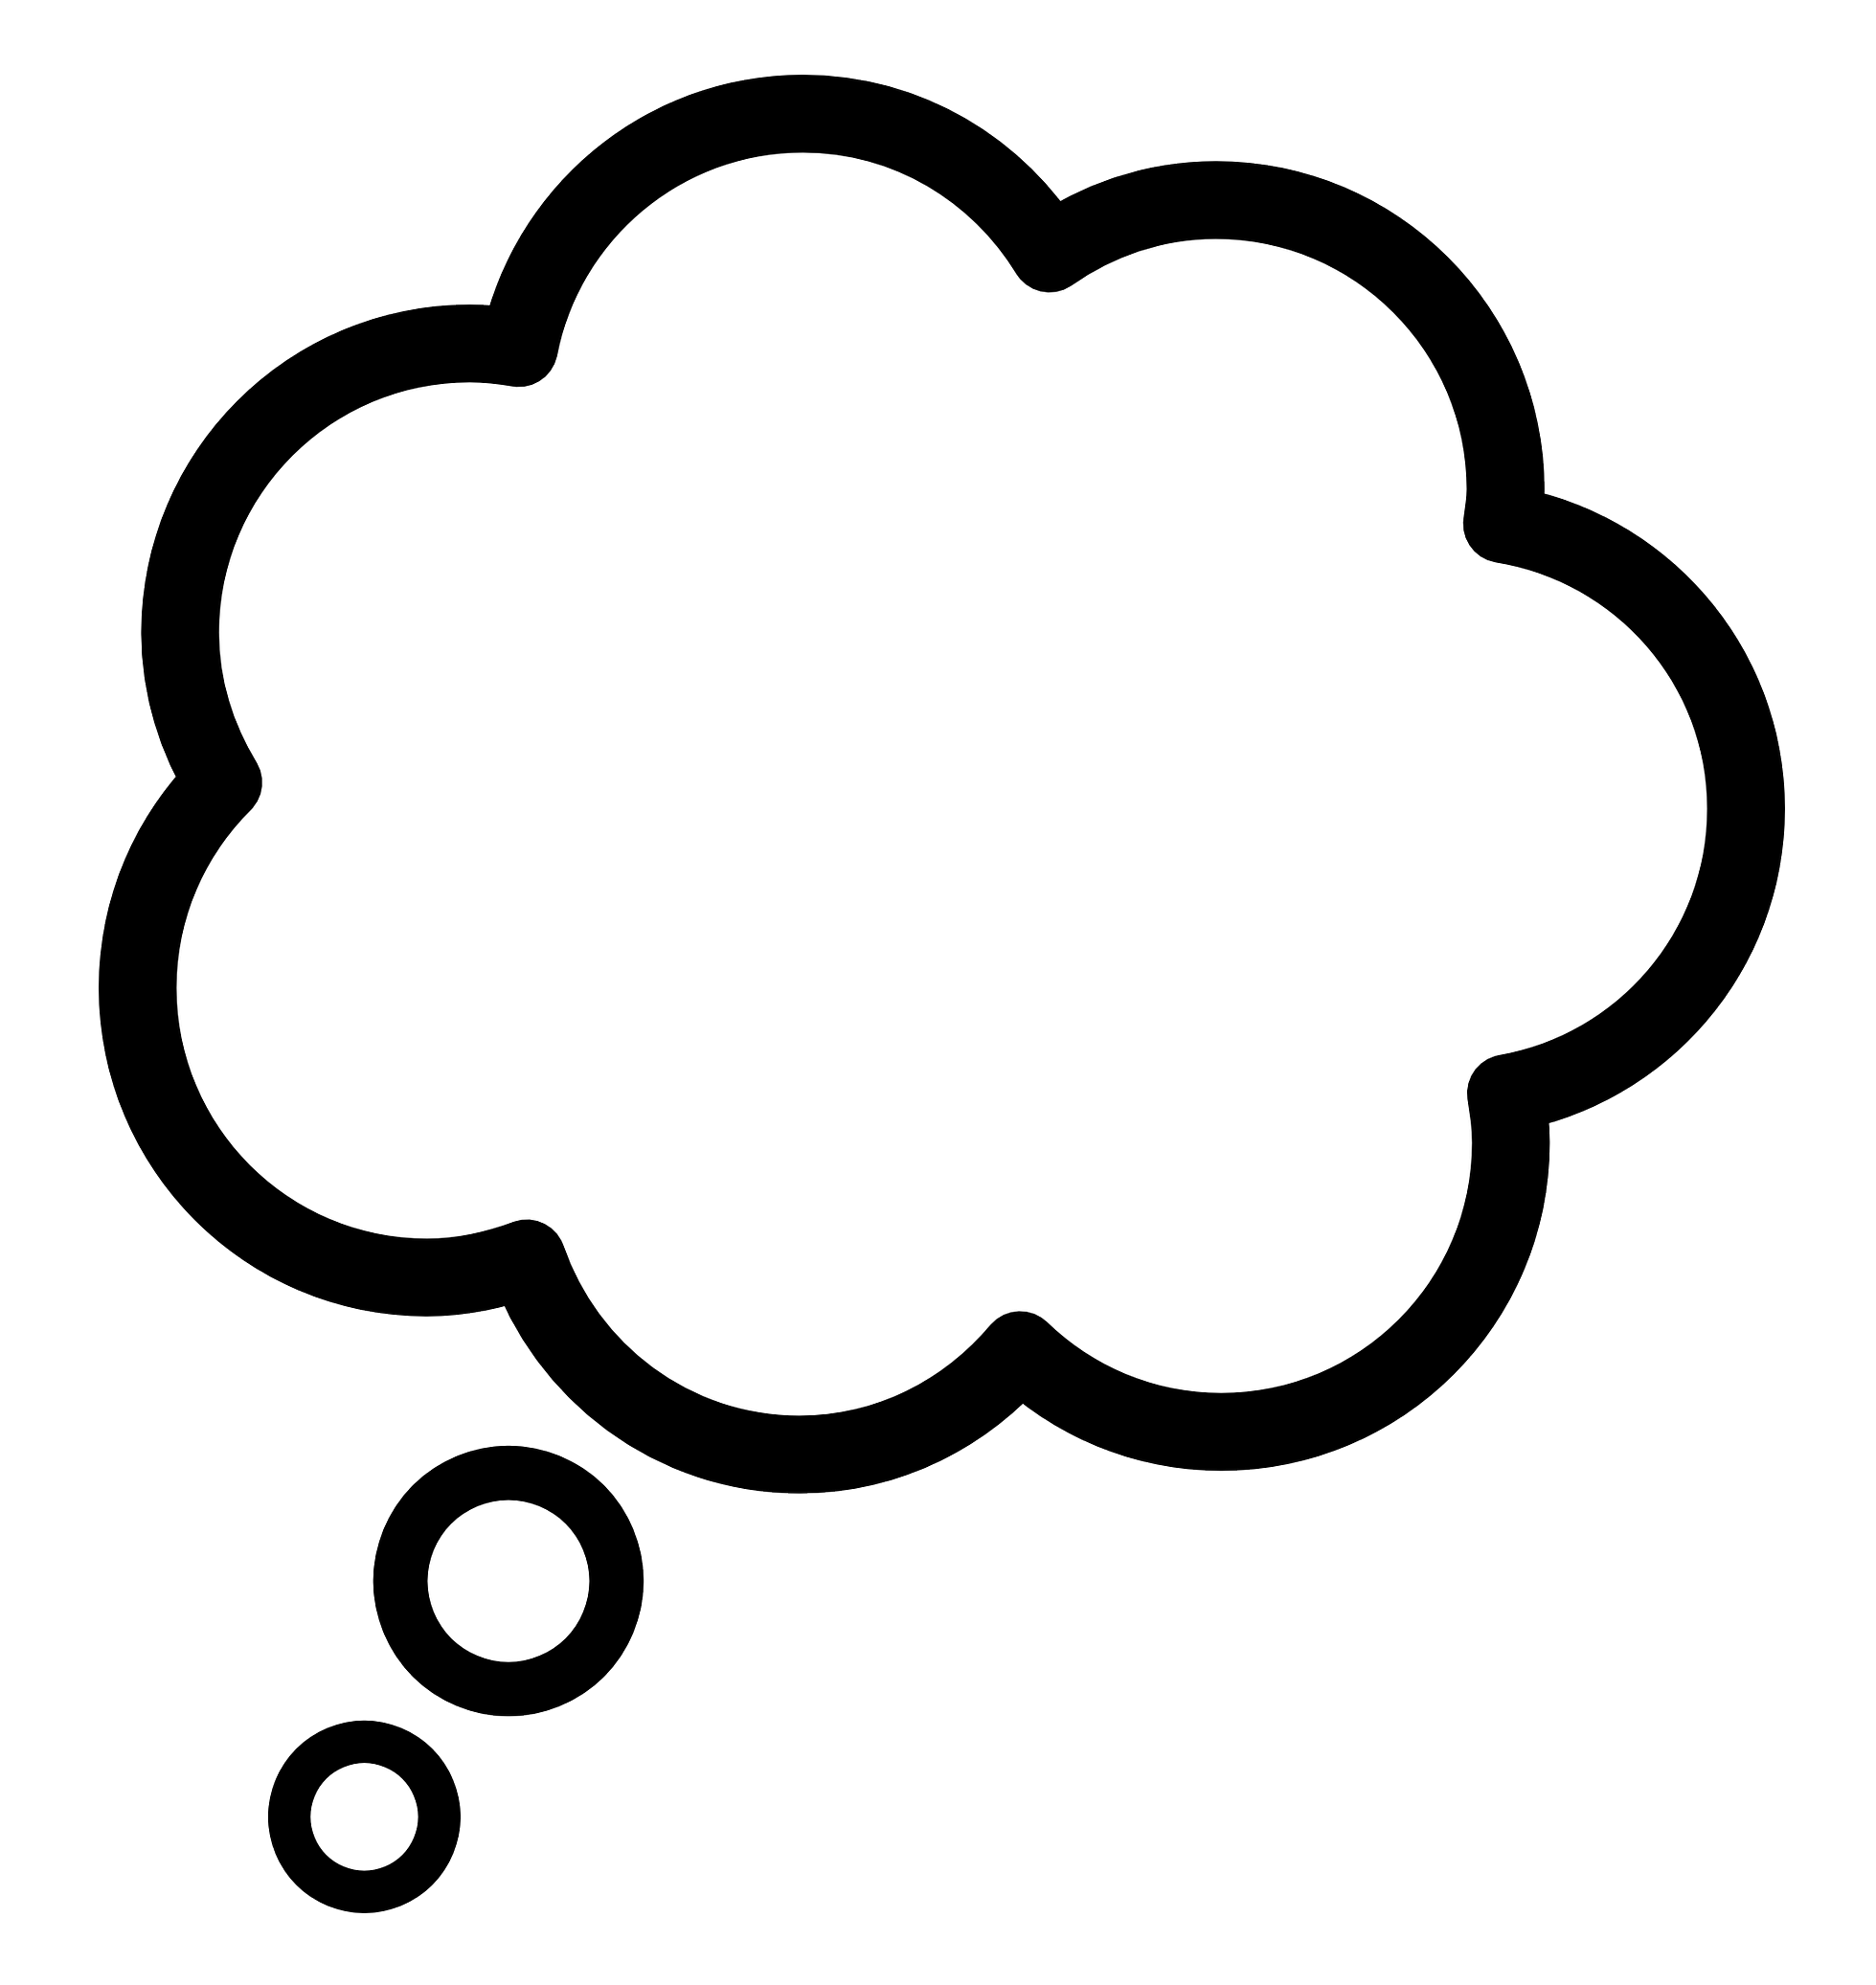 Thinking Thought Bubble PNG HD Quality